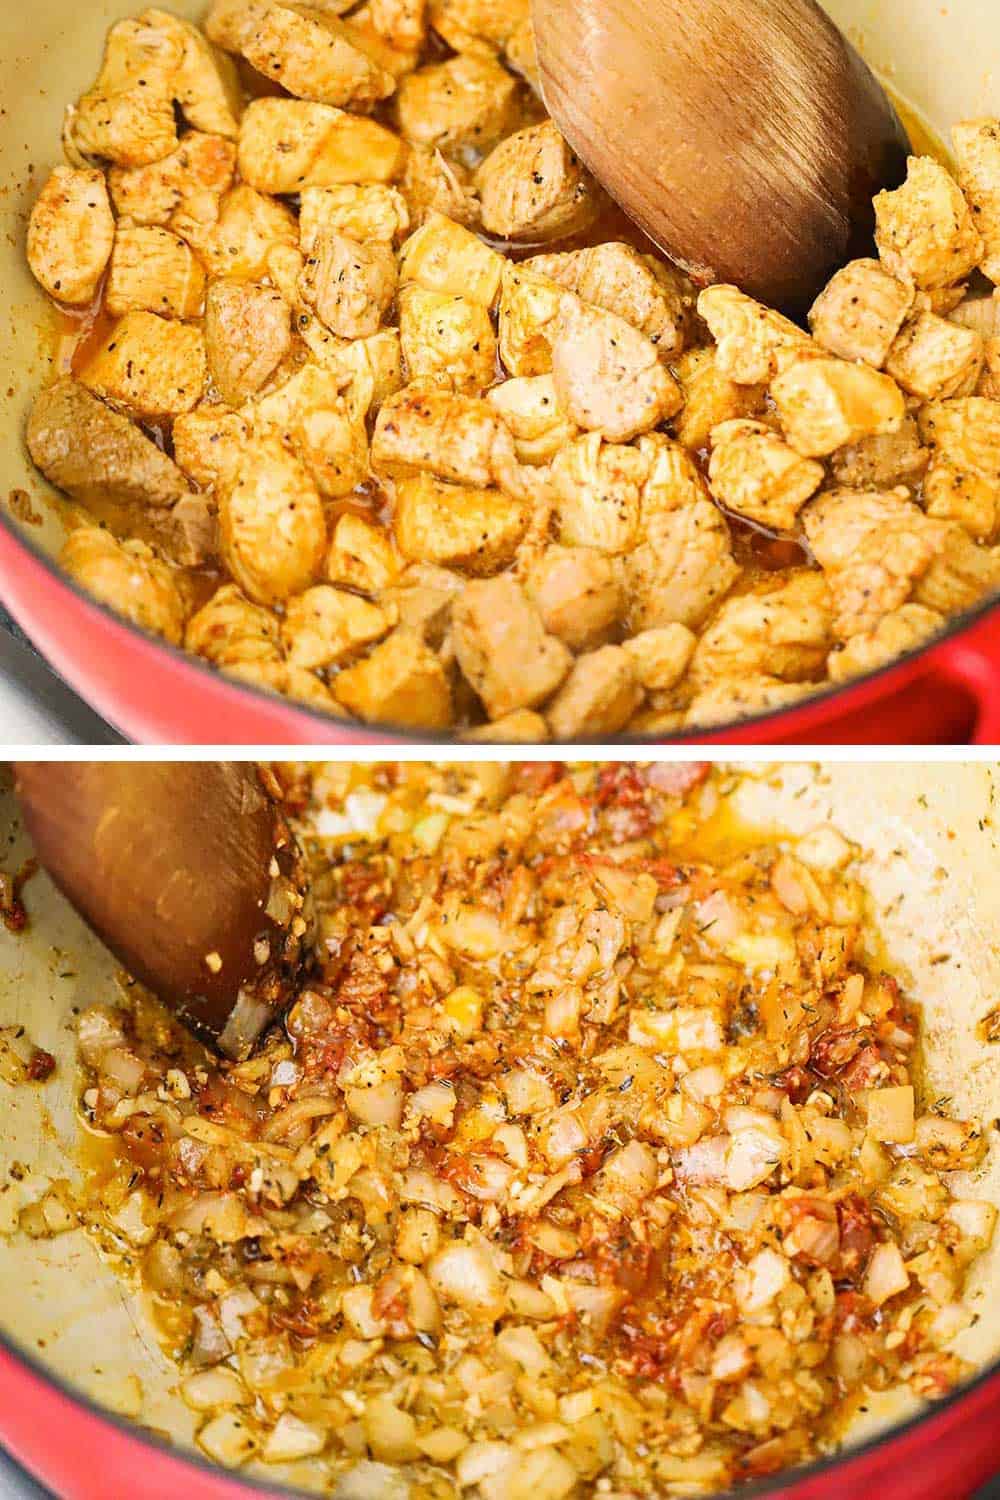 2 images, 1st is a red Dutch oven filled with sautéed chicken and pork pieces, and the next is the same pot with sautéd onions in tomato paste. 